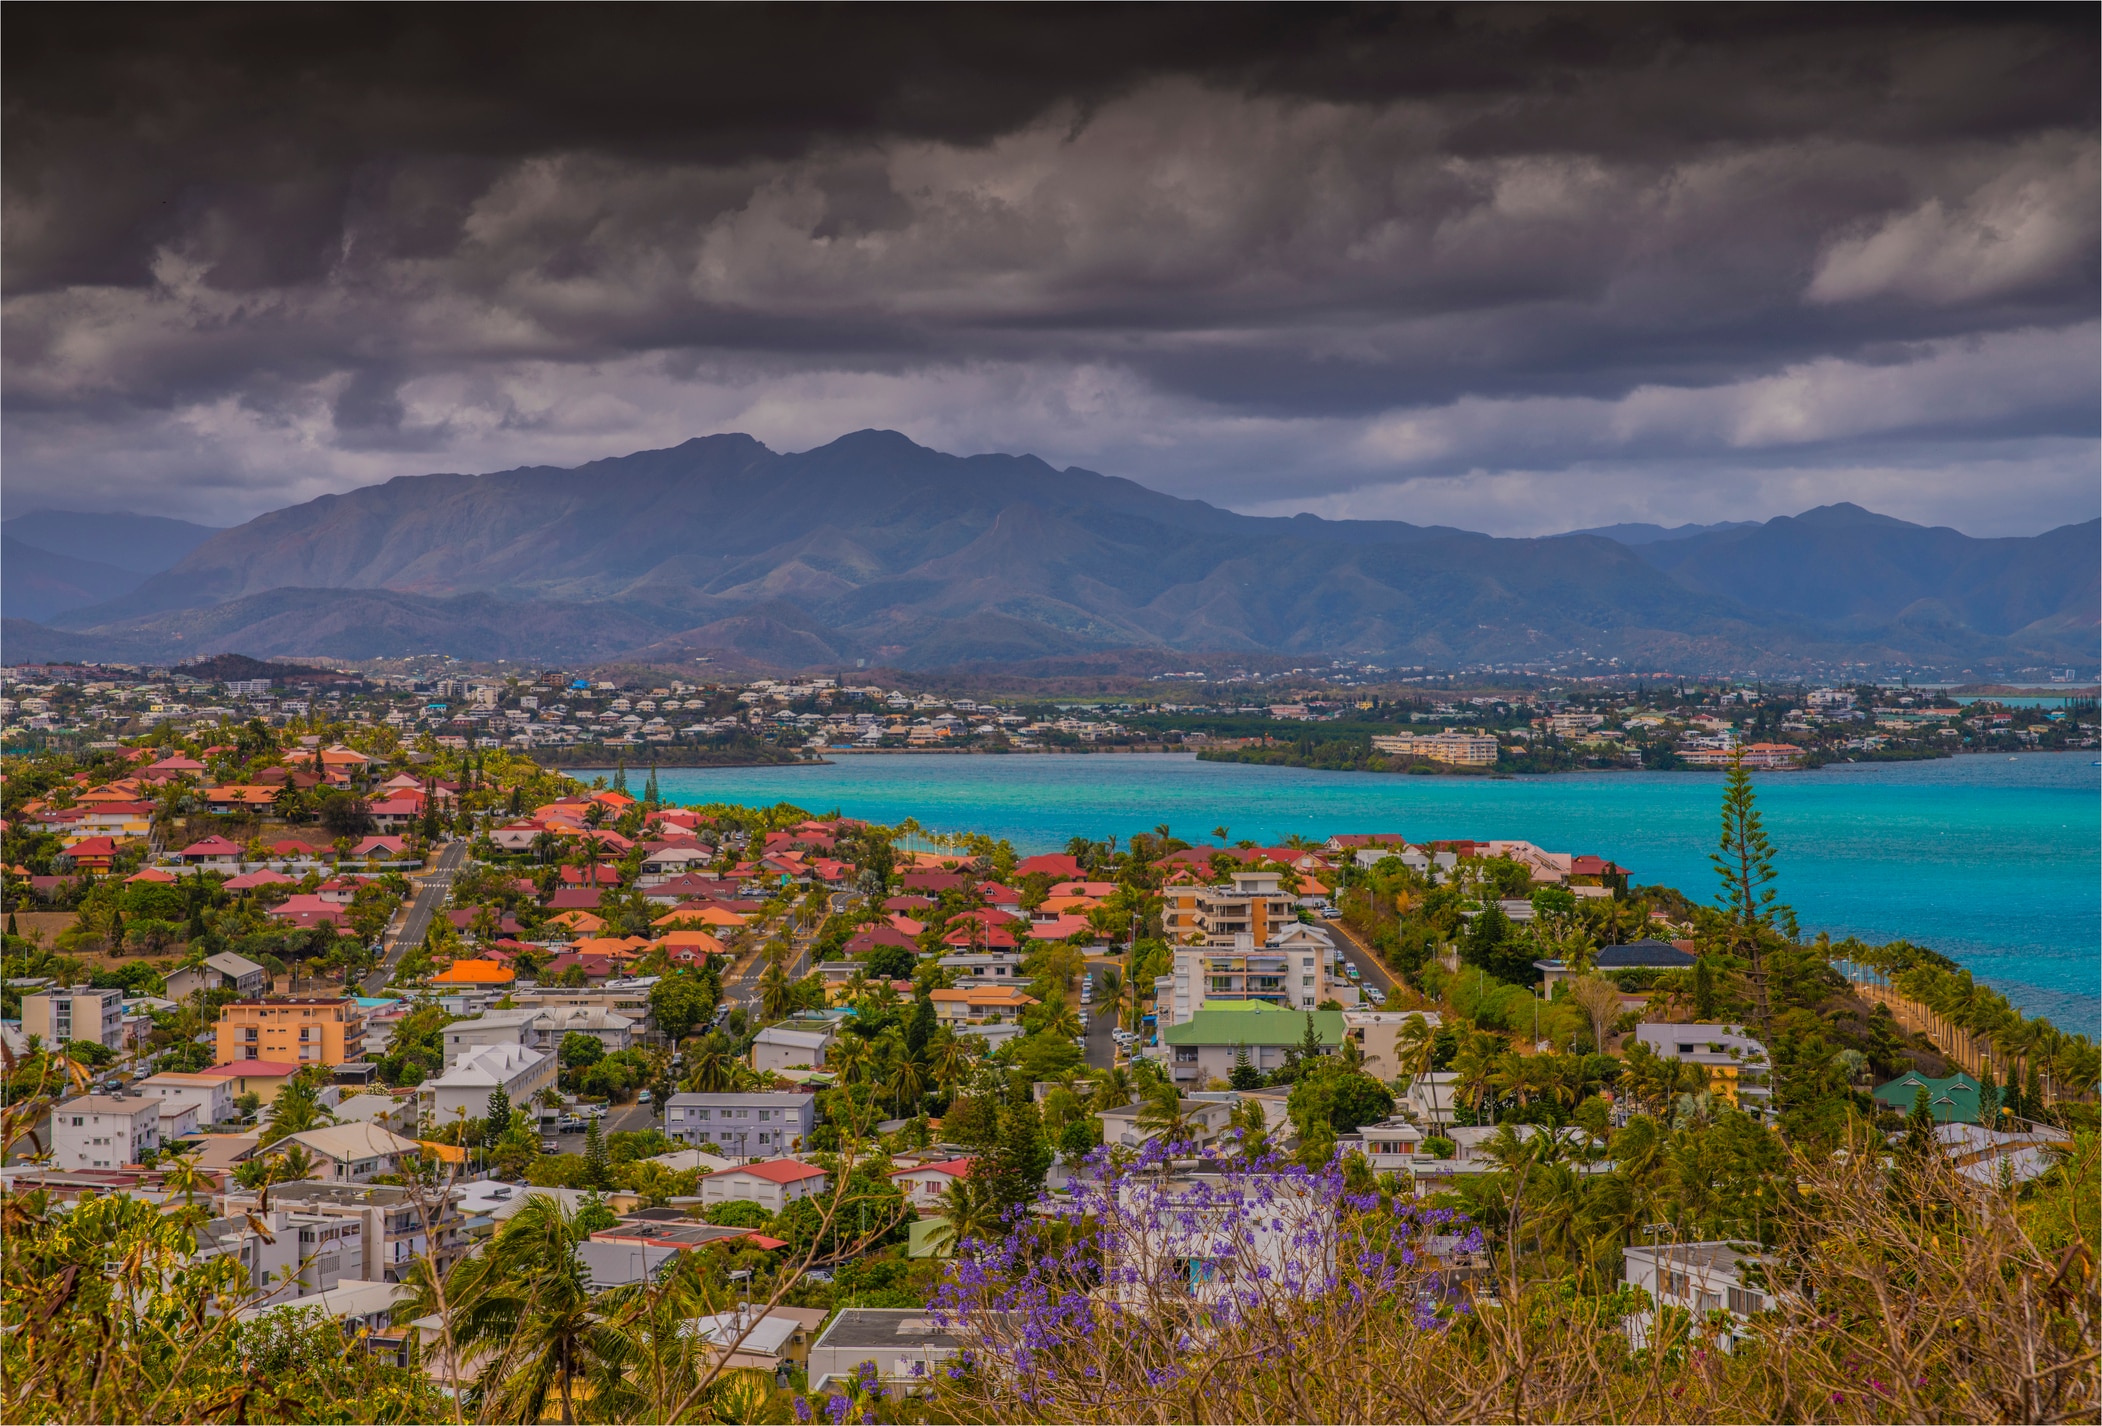 New Caledonia is home to 270,000 people. 